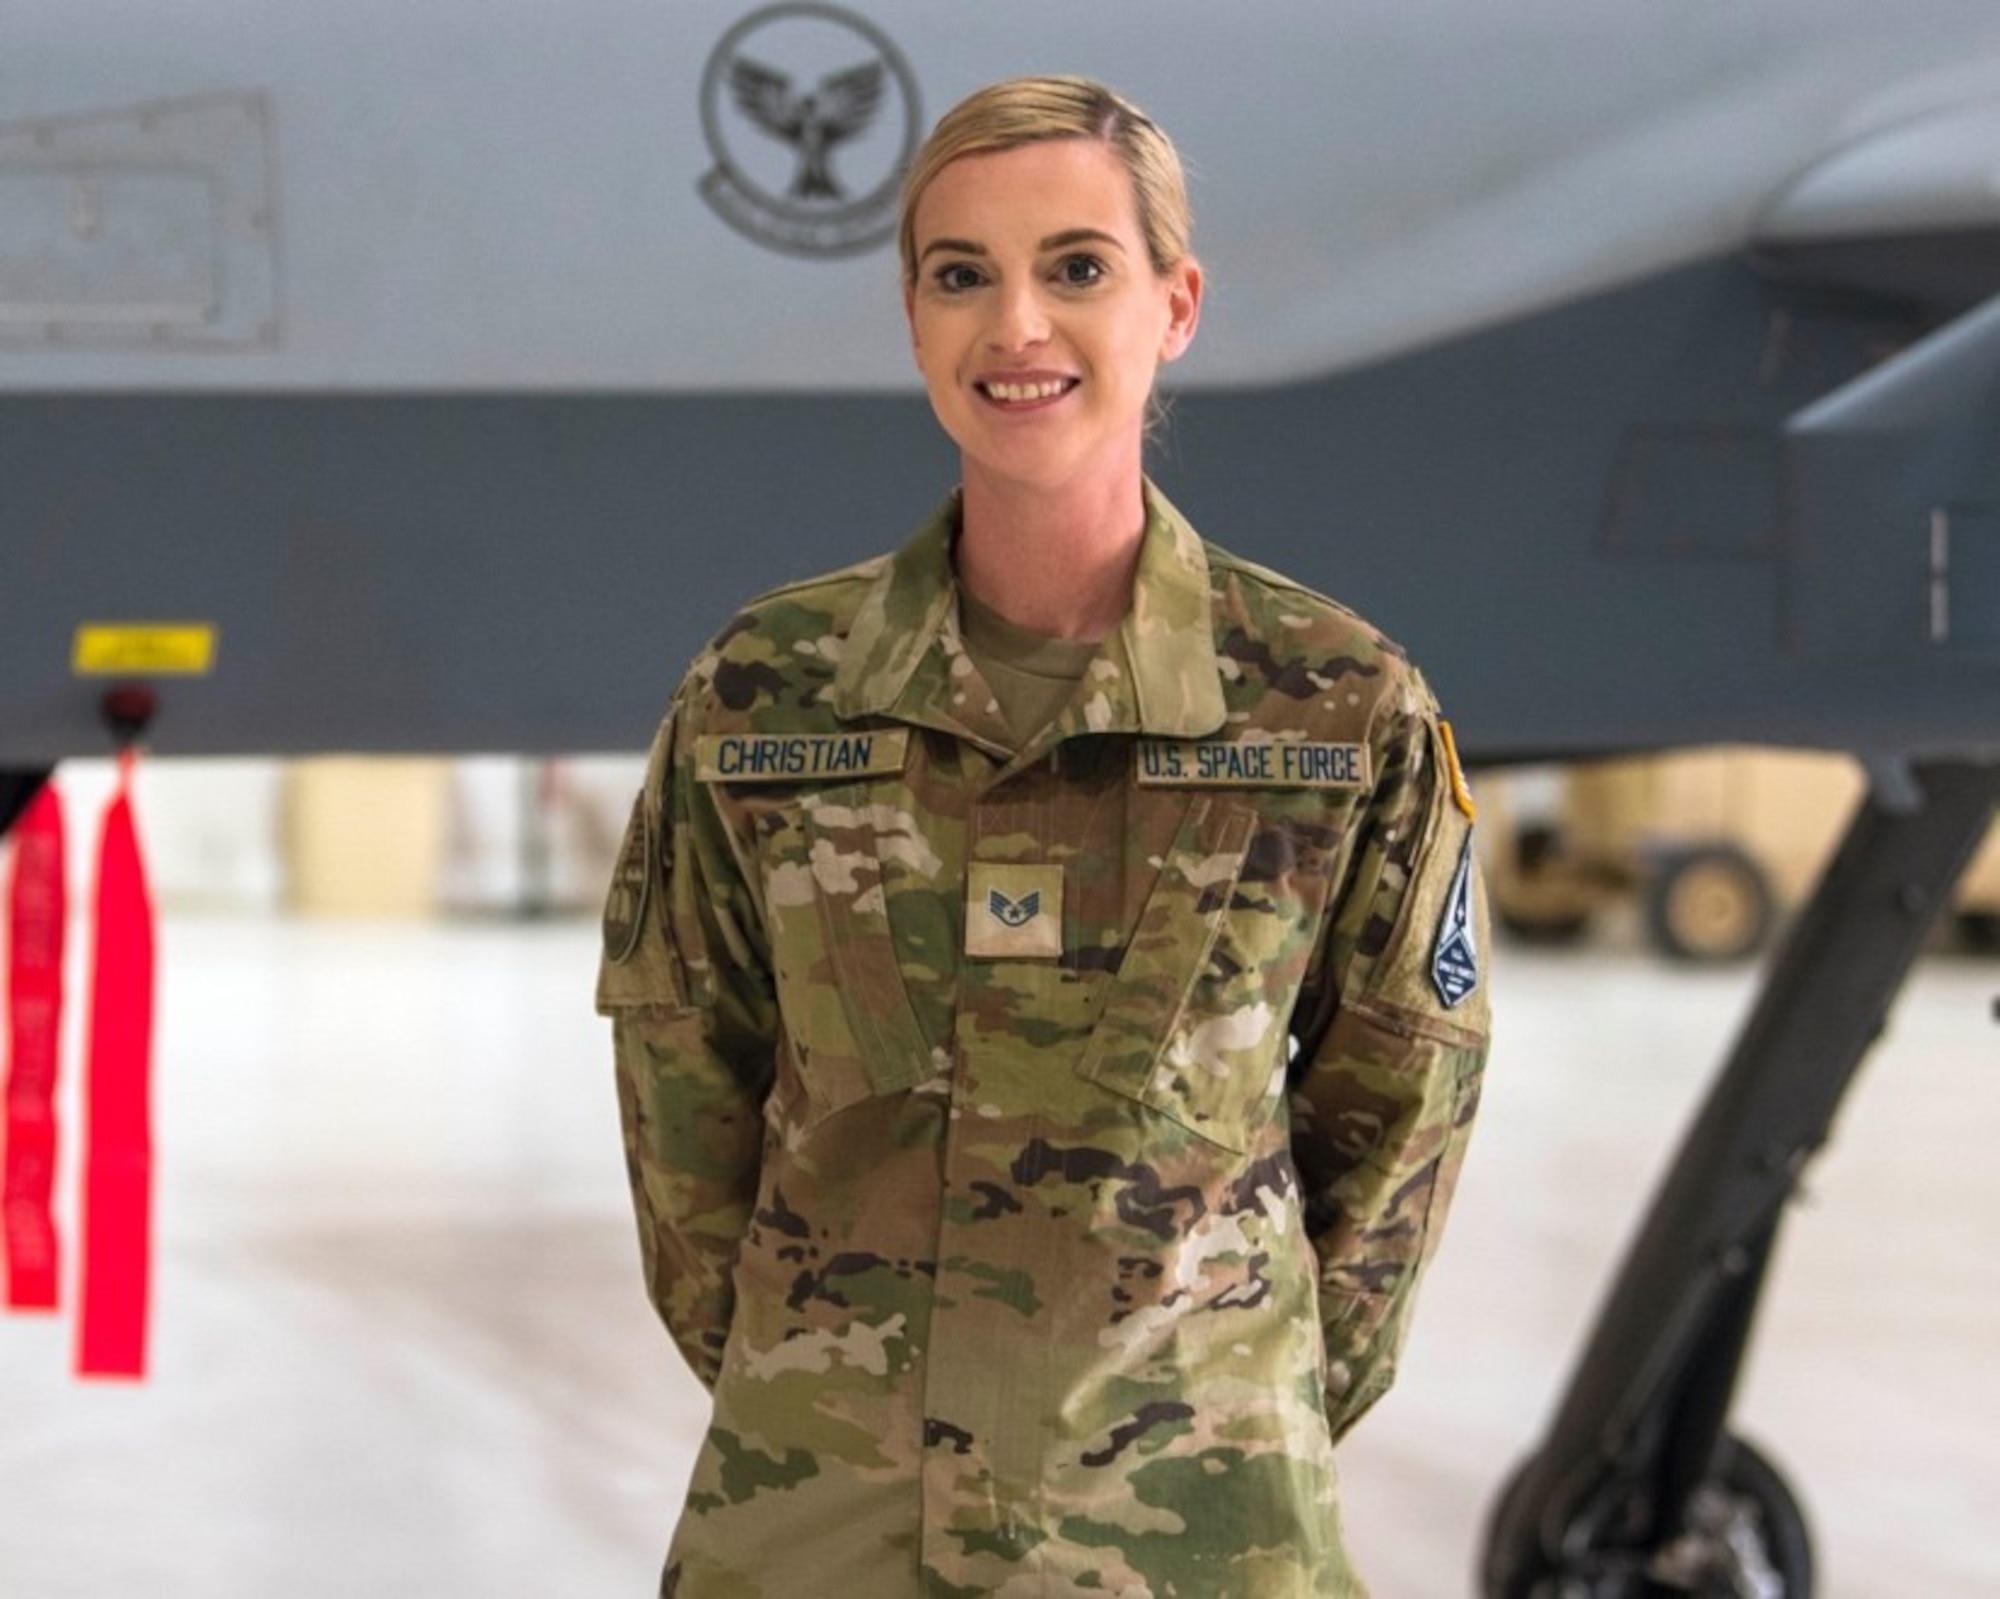 U.S. Space Force Sgt. Molly Christian, 49th Aircraft Maintenance Squadron, poses for a photo Feb. 12, 2021, on Holloman Air Force Base, New Mexico. The USSF is currently working on transferring over 6,000 Airmen from the Air Force to the Space Force by mid-2021. In Sept. 2020, the Air Force transitioned more than 2,400 active-duty Airmen in space operations and space system operations to begin establishing, maintaining, and preserving U.S. freedom of operations in space. (U.S. Air Force photo by Airman 1st Class Jessica Sanchez)